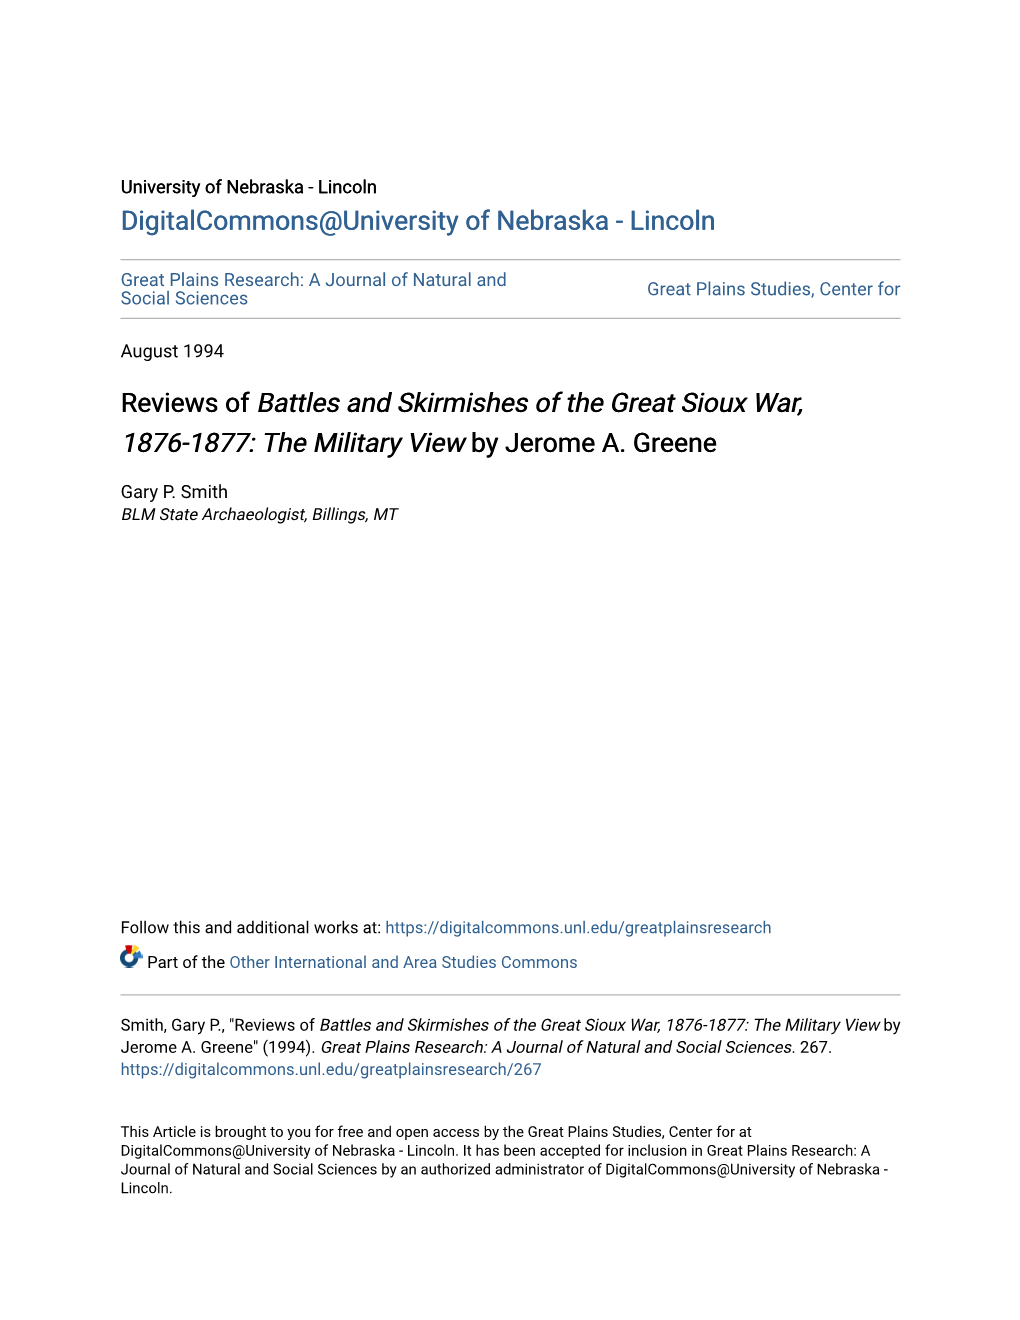 Reviews of Battles and Skirmishes of the Great Sioux War, 1876-1877: the Military View by Jerome A